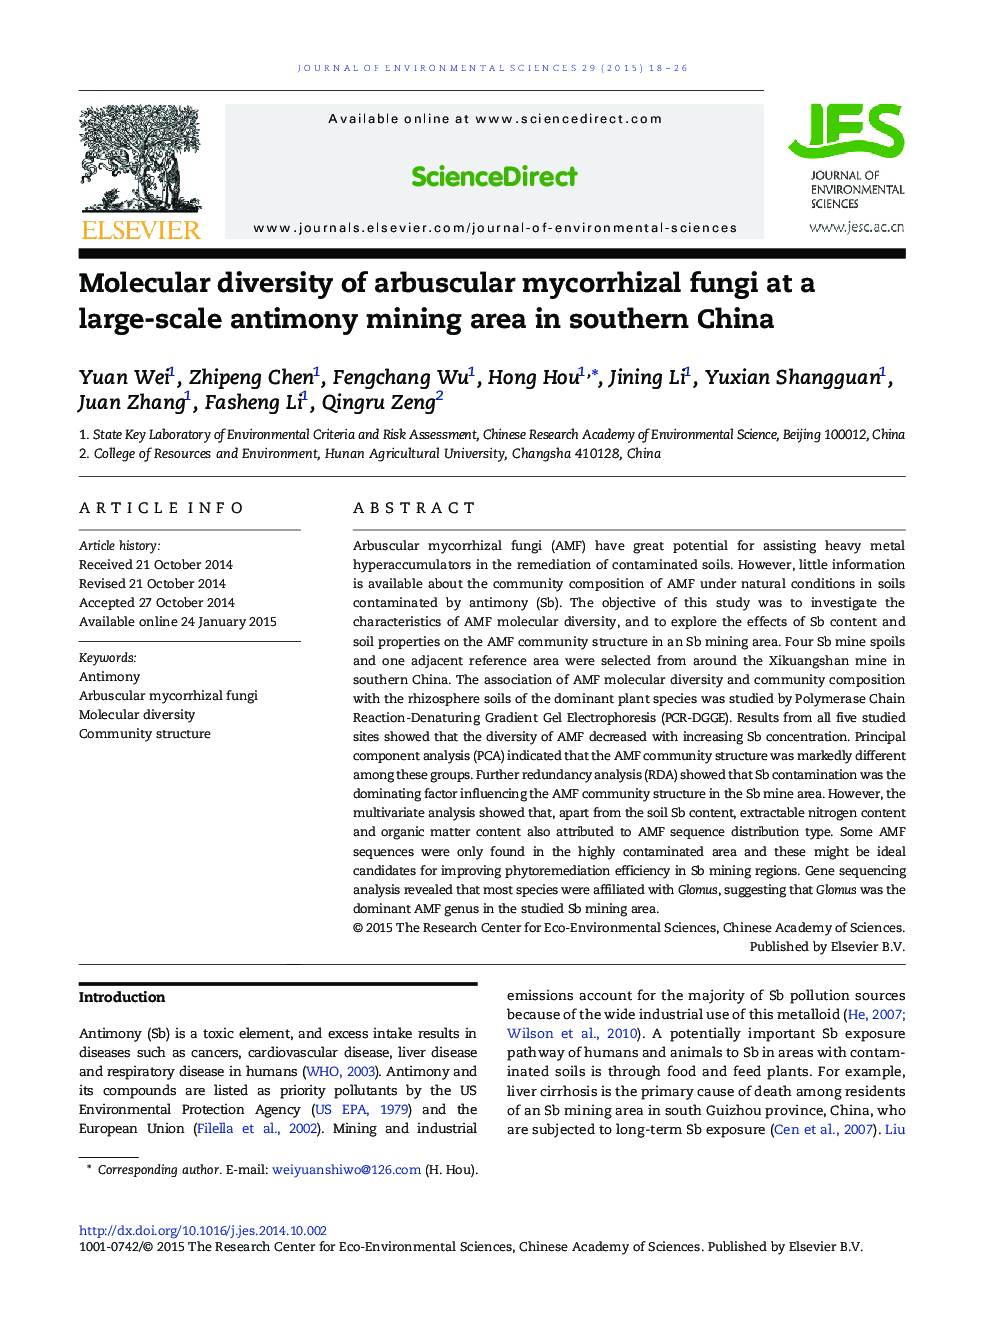 Molecular diversity of arbuscular mycorrhizal fungi at a large-scale antimony mining area in southern China